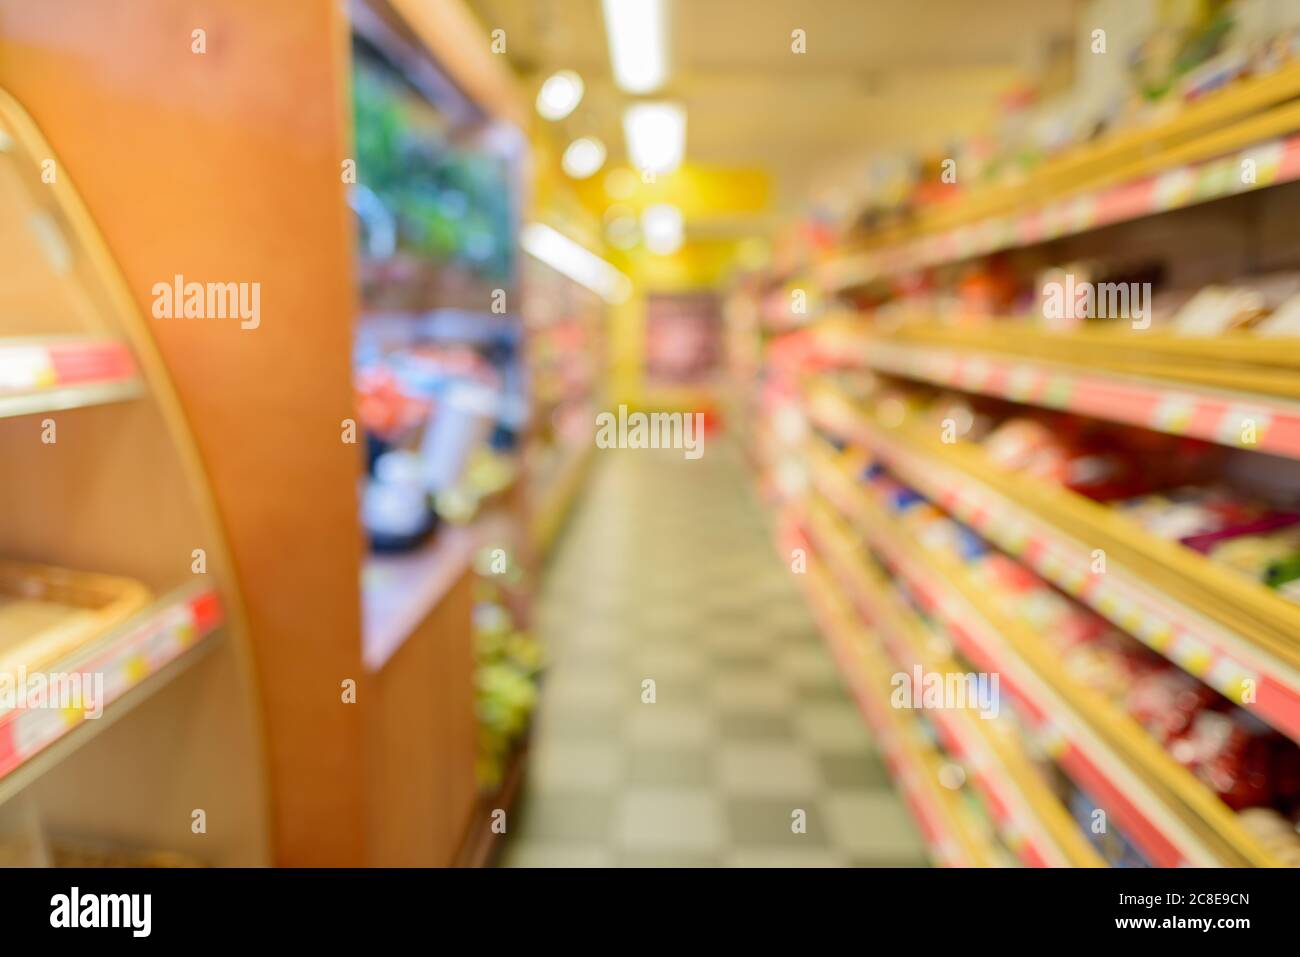 Defocused supermarket aisle with shelves filled with grocery and checkered floor Stock Photo